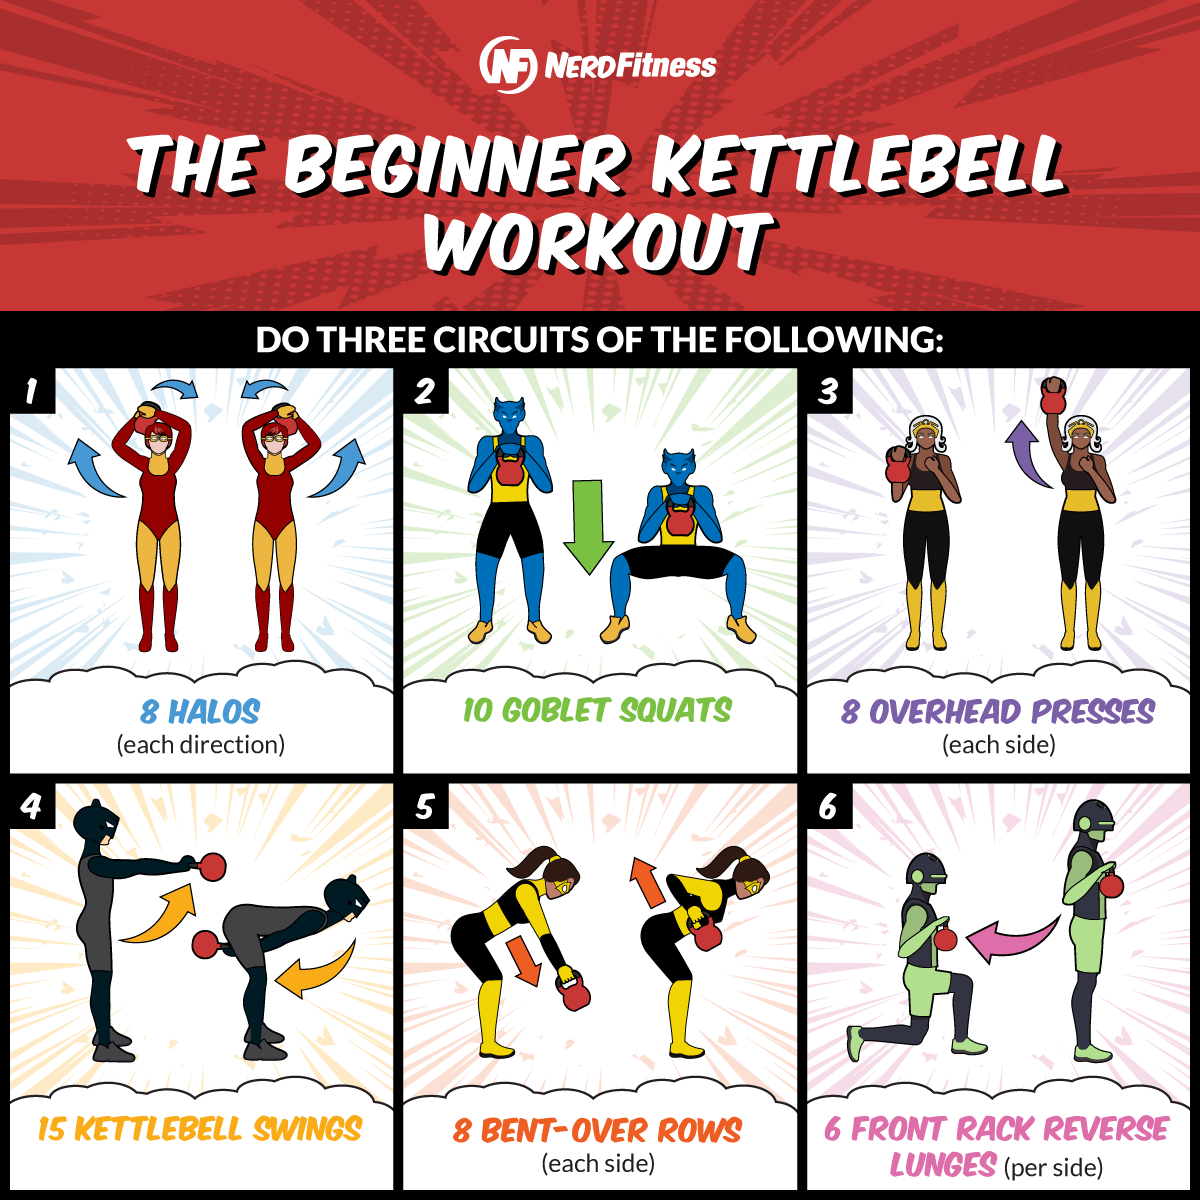 The Kettlebell Workout (20Minute Routine for Beginners) Nerd Fitness